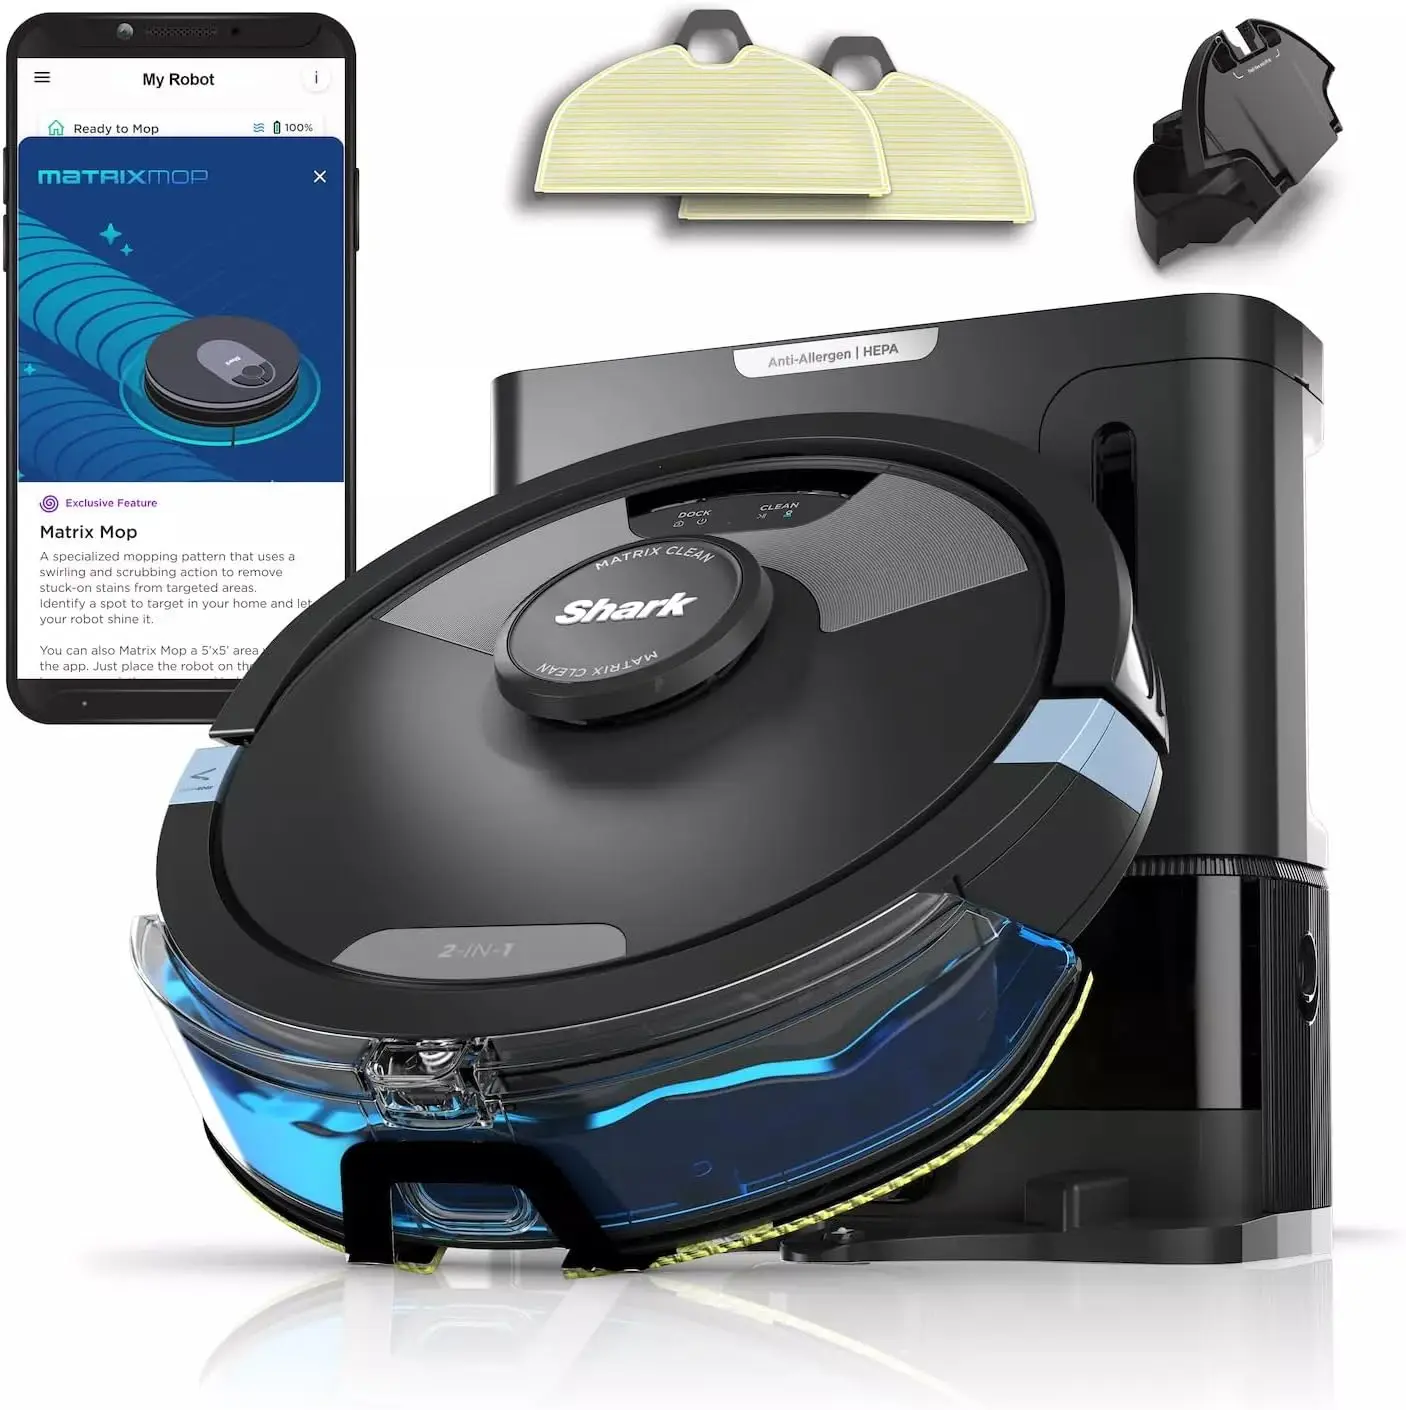 

Shark RV2610WA AI Ultra 2in1 Robot Vacuum & Mop with Sonic Mopping, Matrix Clean, Home Mapping, HEPA Bagless